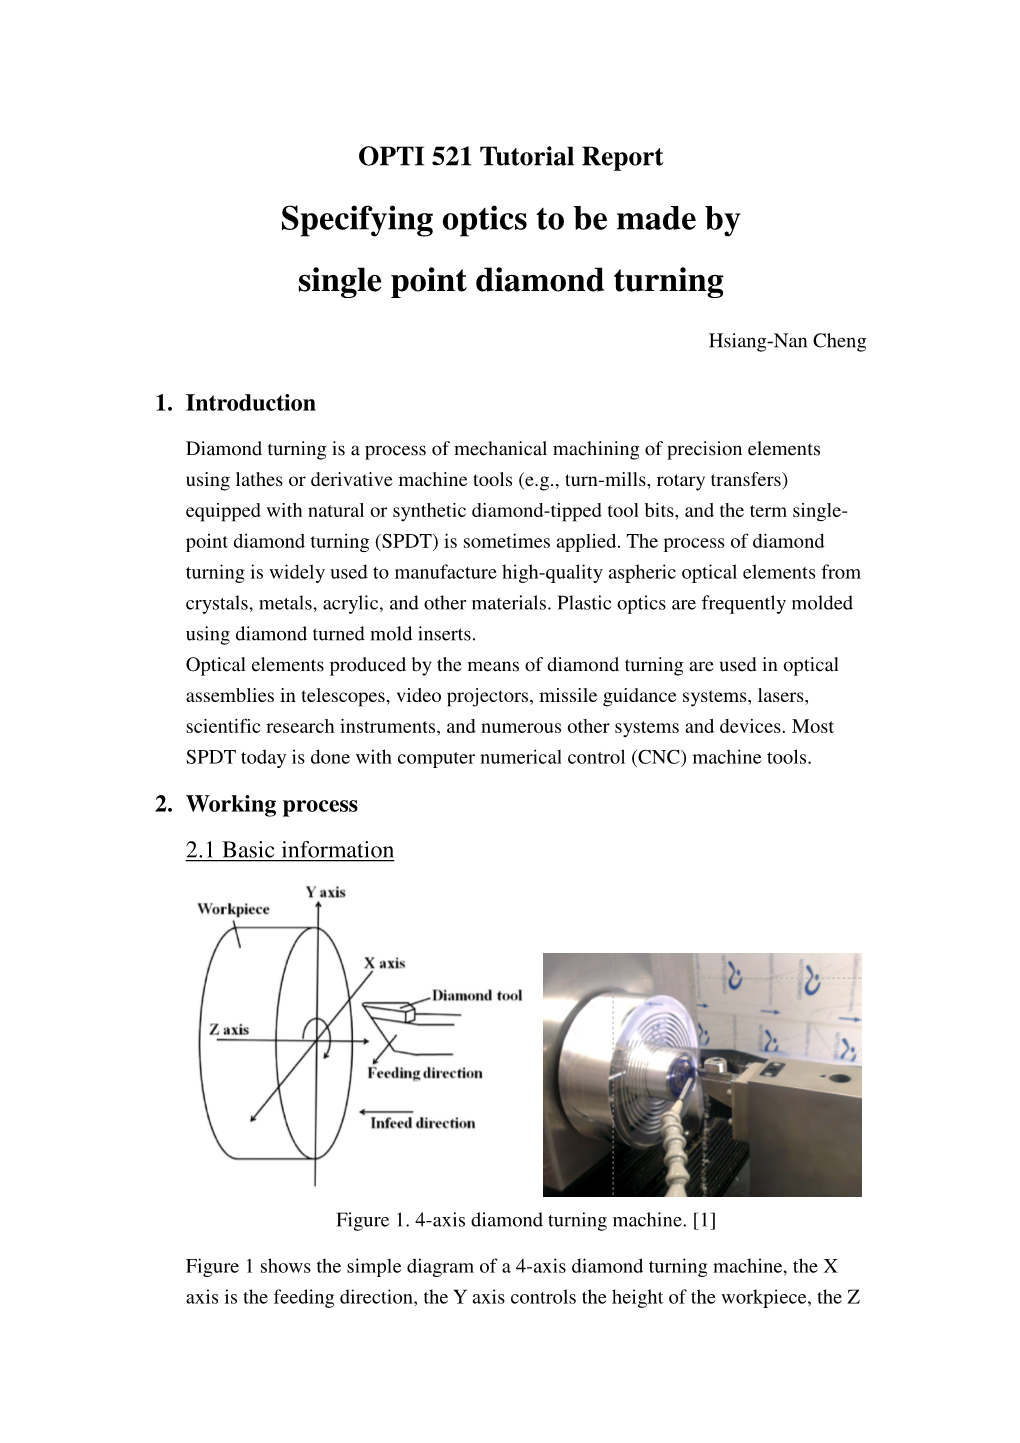 Specifying Optics to Be Made by Single Point Diamond Turning